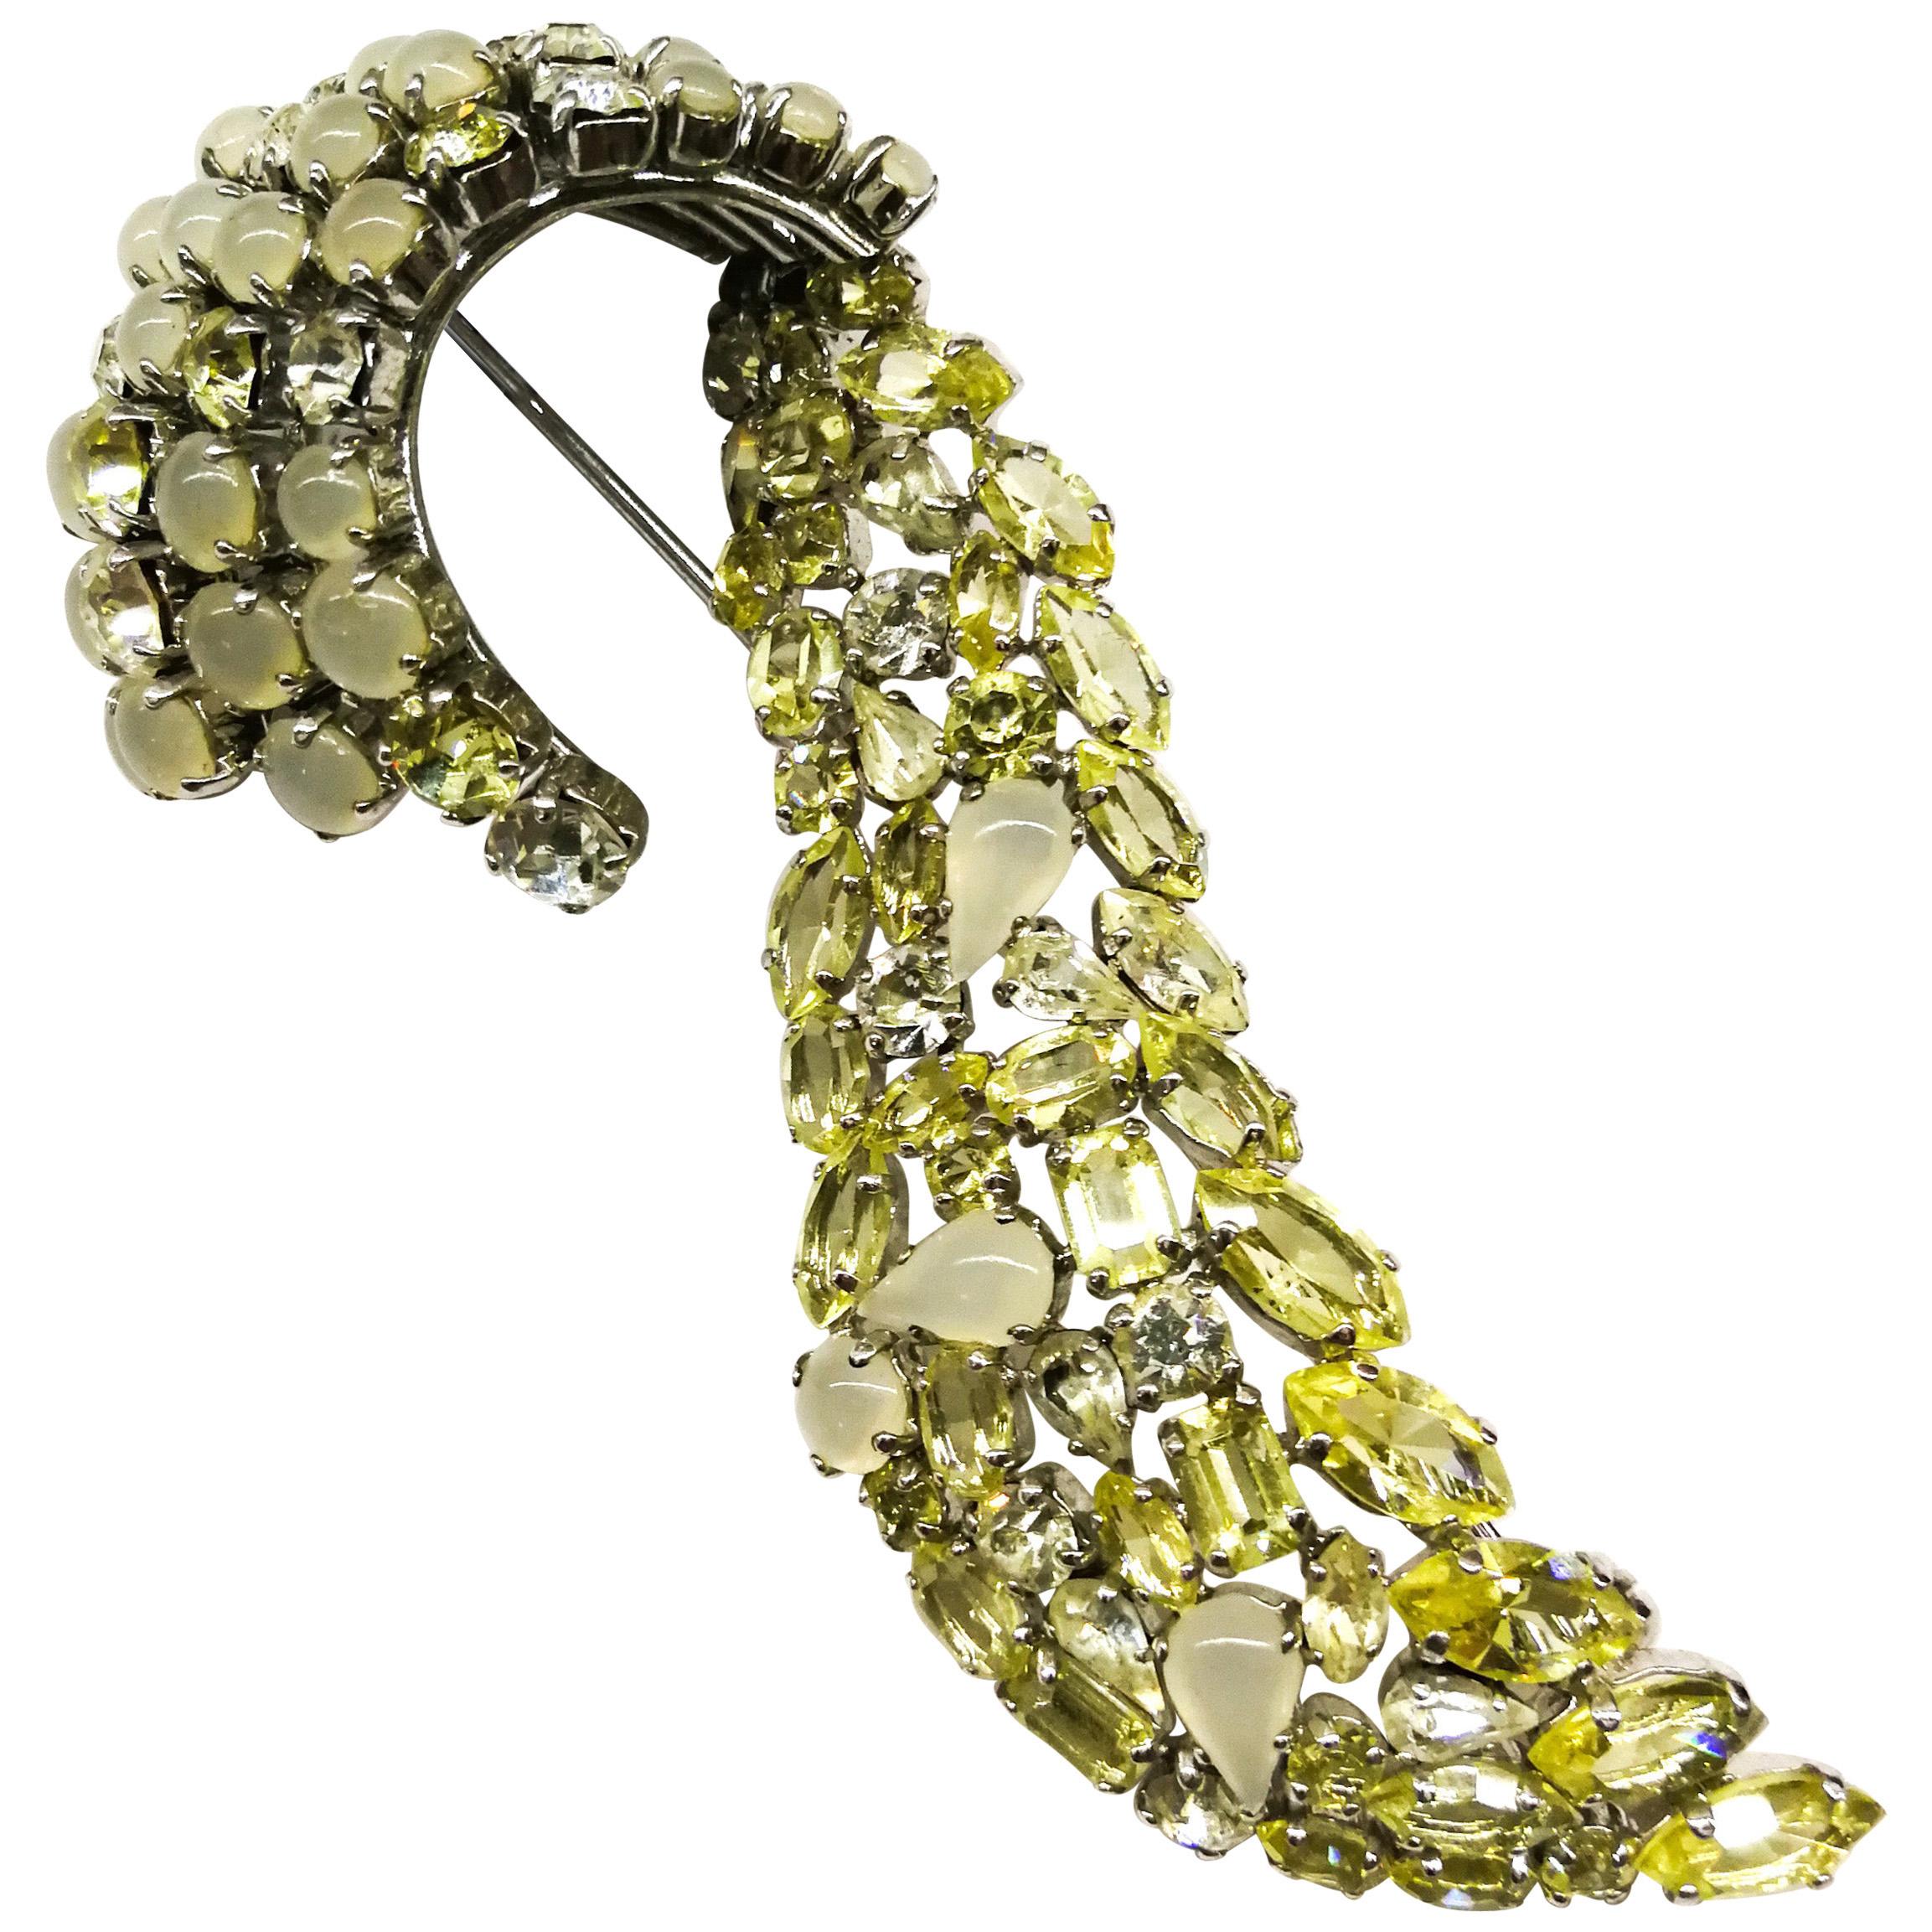 A large citrine and opaline paste 'scroll' brooch, Christian Dior, Germany, 1962